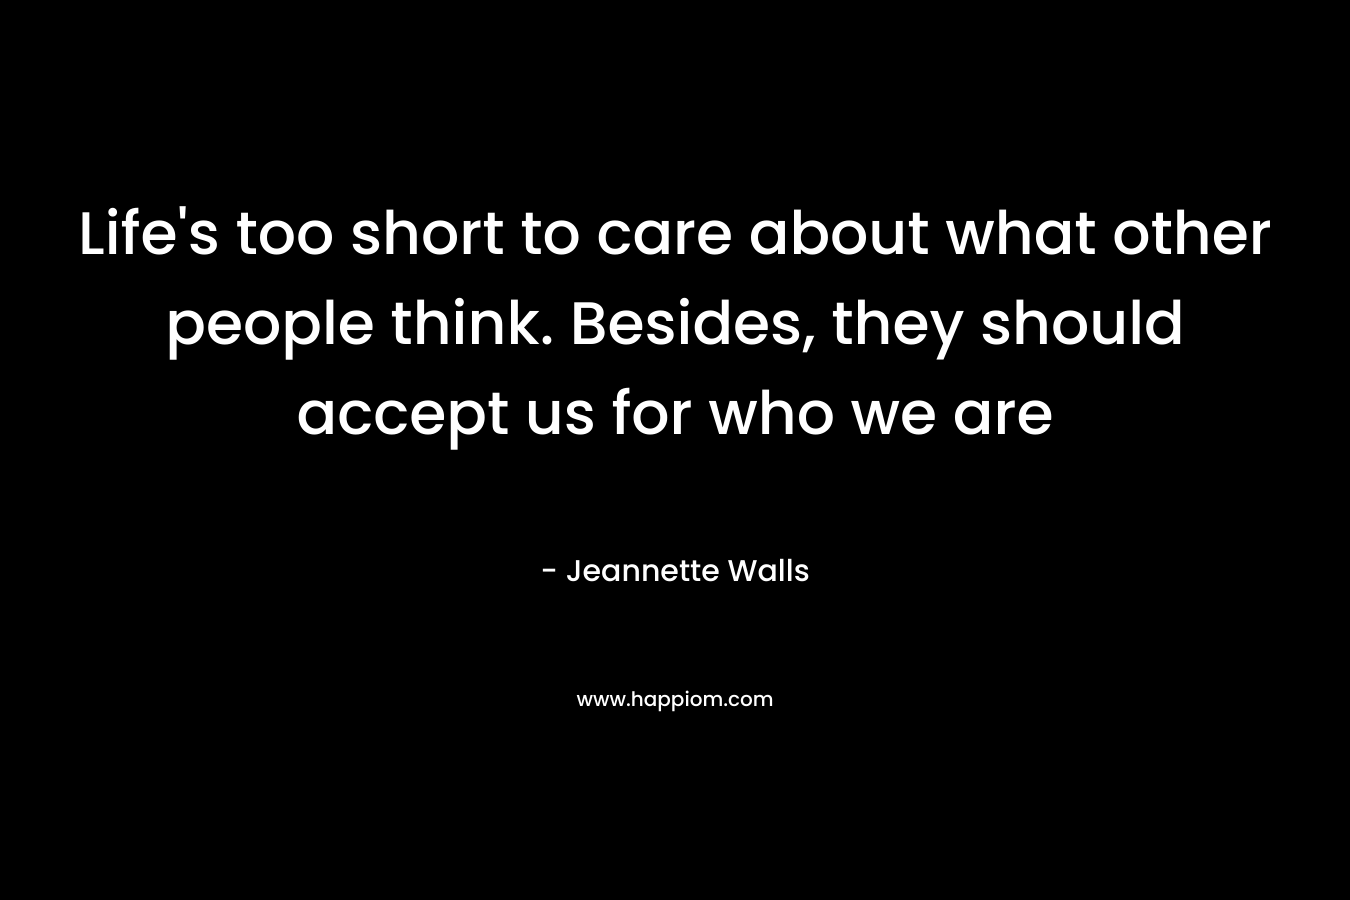 Life’s too short to care about what other people think. Besides, they should accept us for who we are – Jeannette Walls